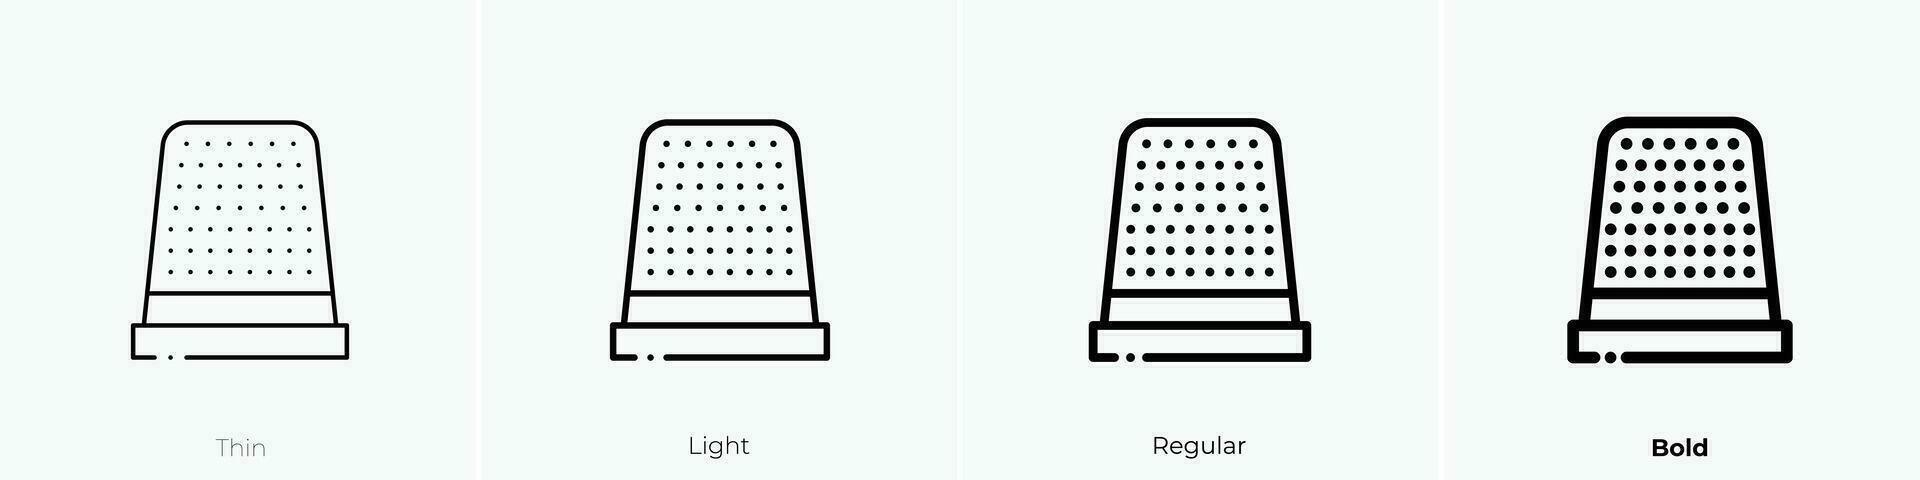 thimble icon. Thin, Light, Regular And Bold style design isolated on white background vector